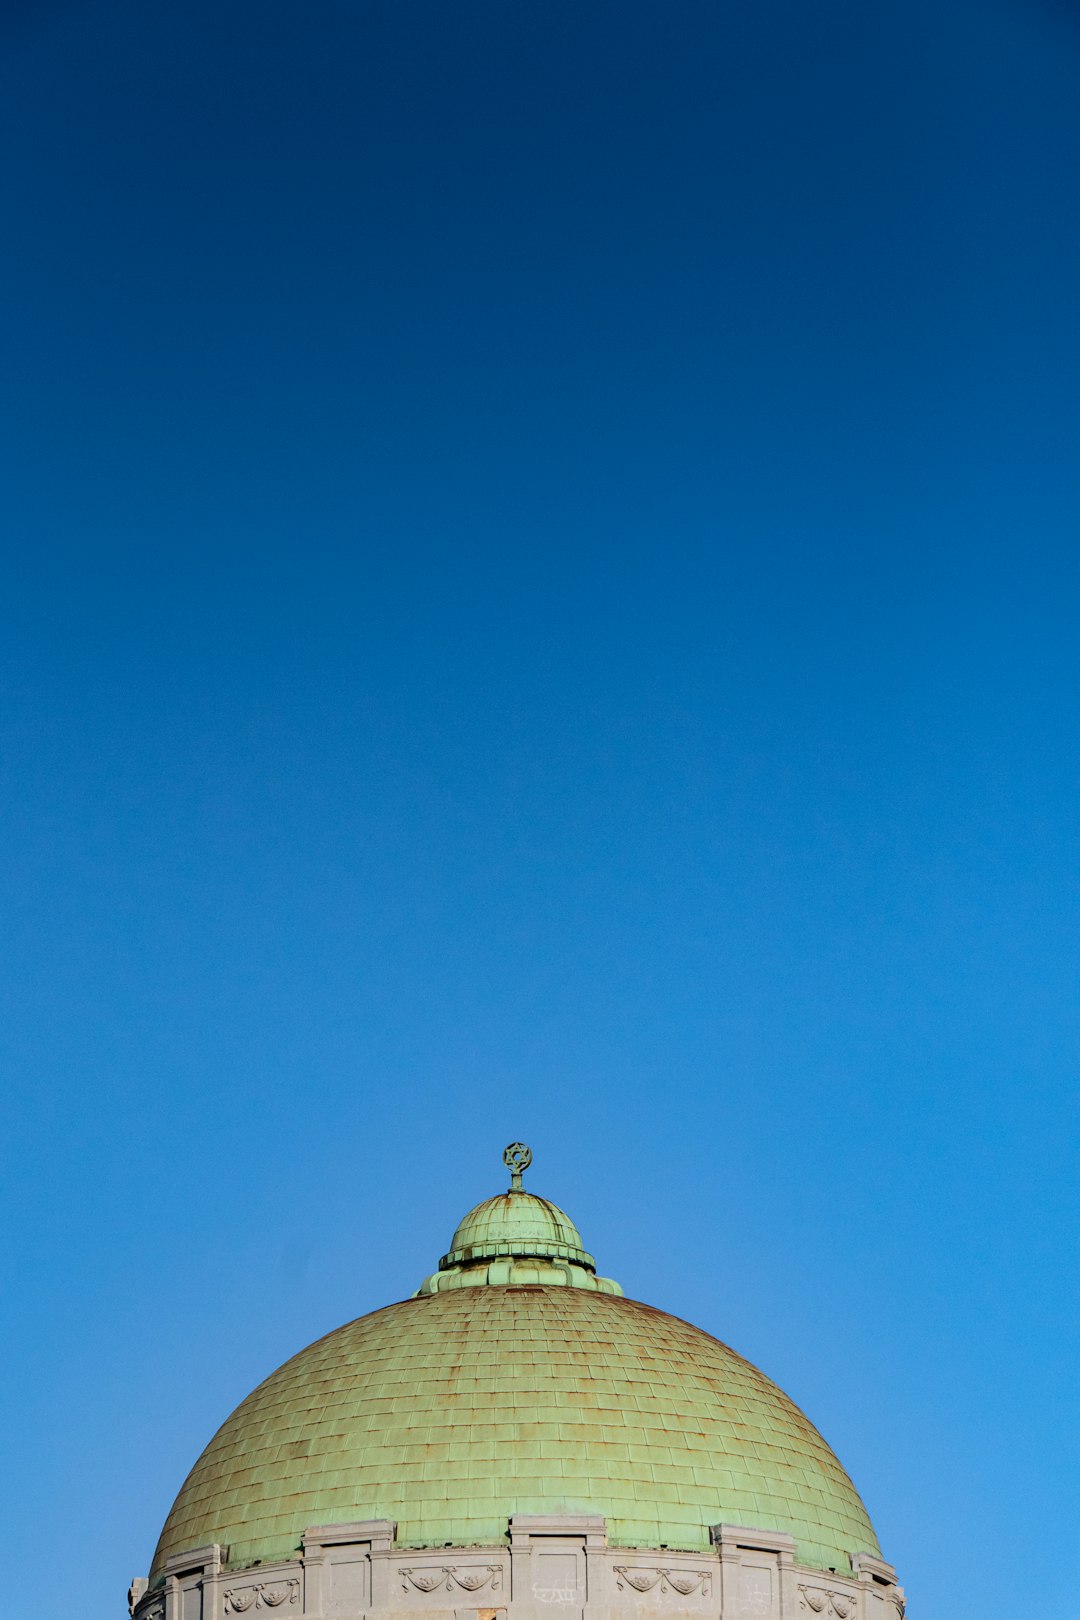 brown and white dome building under blue sky during daytime